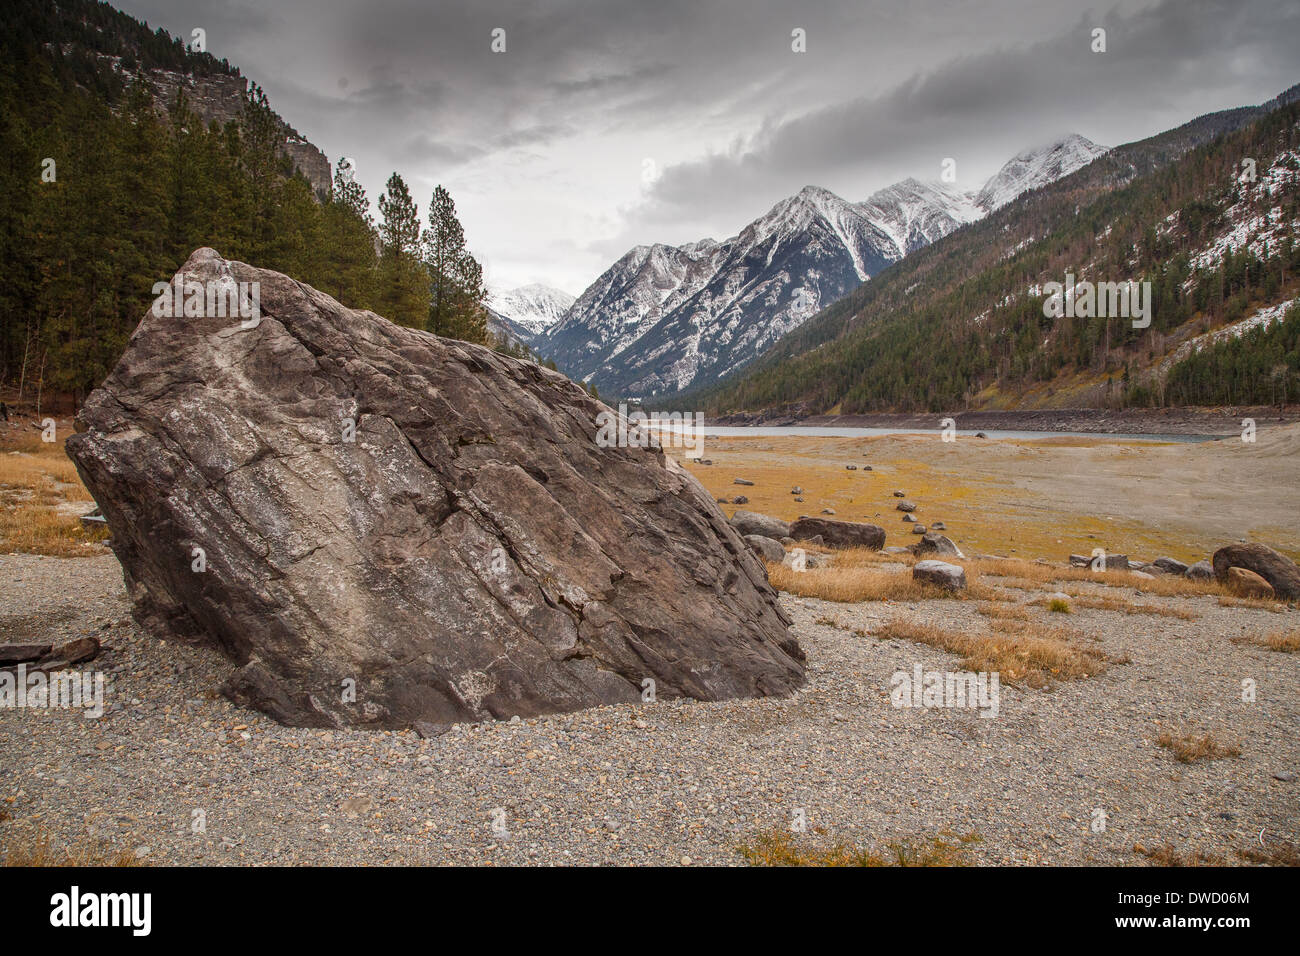 A lonely but rugged scene near the Mission Mountains Tribal Wilderness Stock Photo